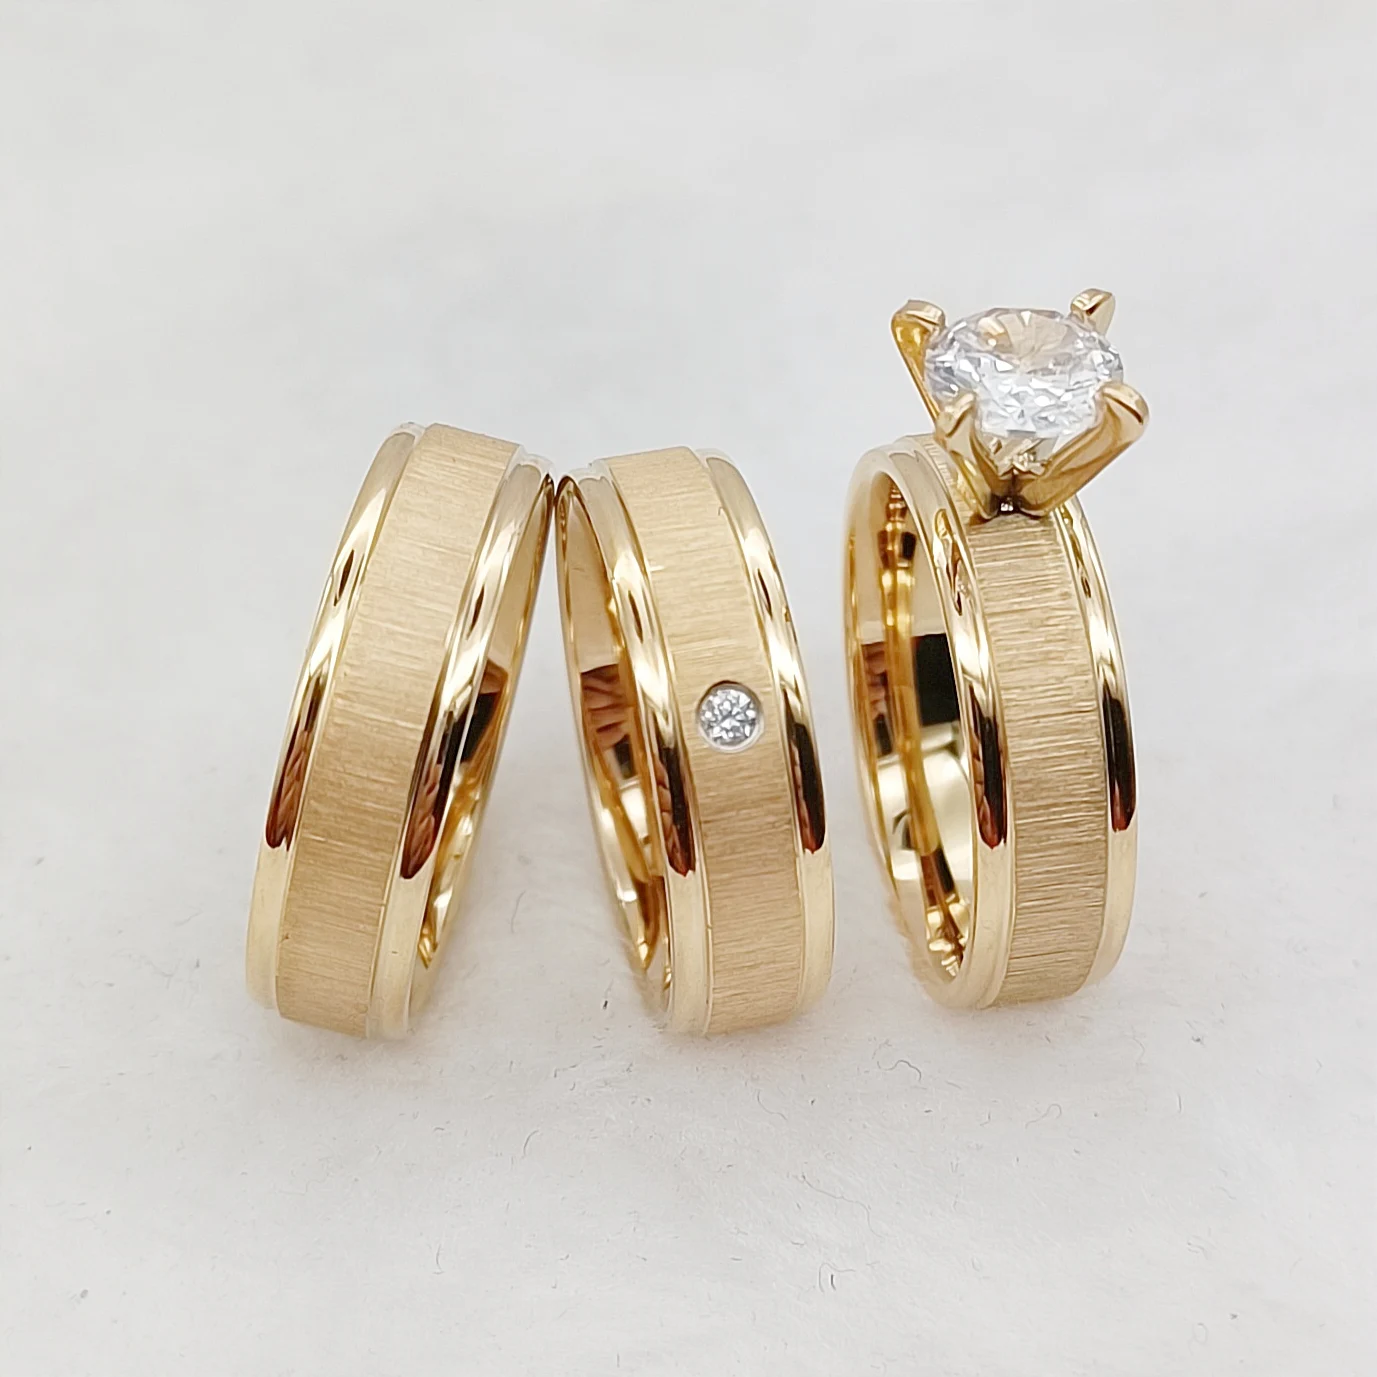 Wholesale 3pcs Wedding Engagement Rings Sets For Couples Designer Matte 24k gold plated jewelry Bridal Marriage